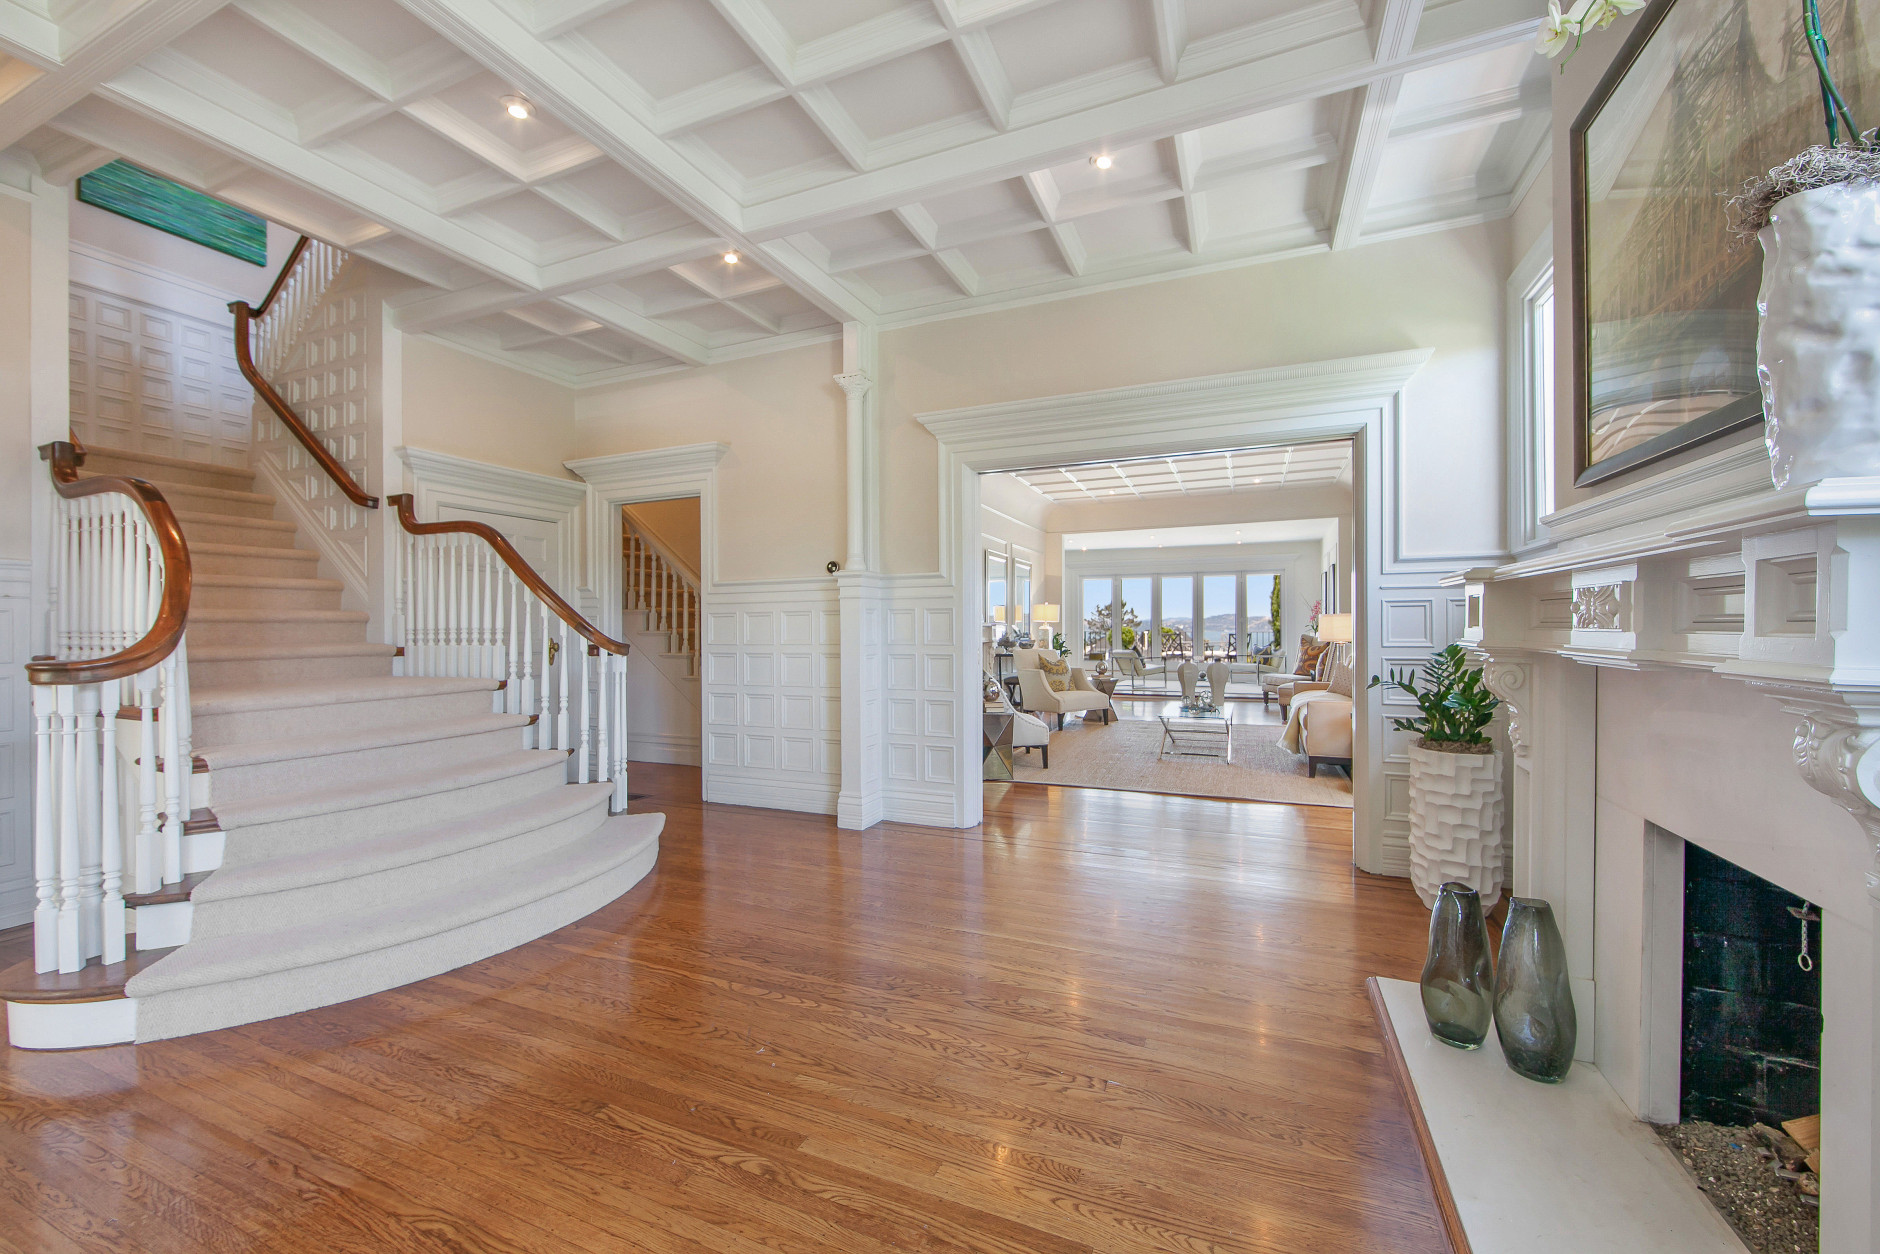 The residence has been used as a location for a feature film and a TV pilot, as well as in catalogs for Pottery Barn and Design within Reach. (Jason Wakefield/TopTenRealEstate)